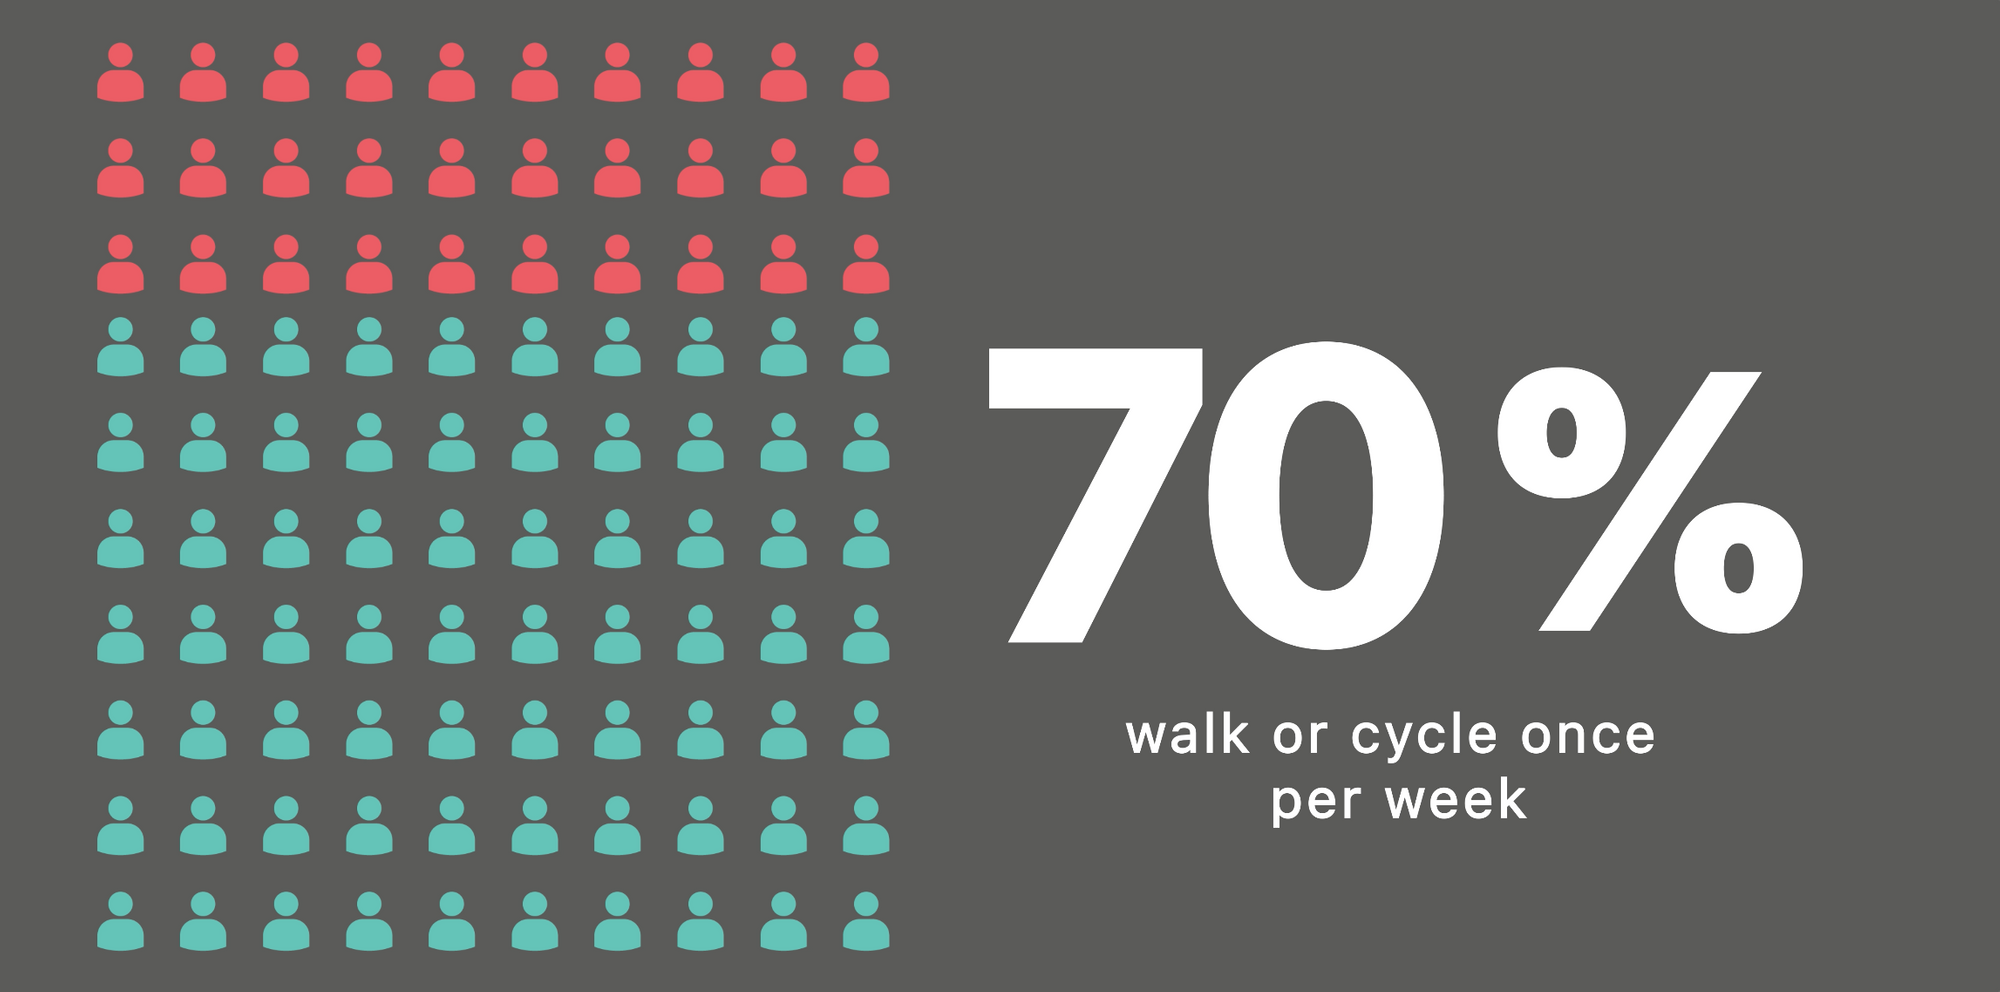 White text saying '70% walk or cycle once per week'. There are a hundred 'person' icons, arranged in lines of ten. Seven of the rows of icons are light blue, three of the rows are red.n 